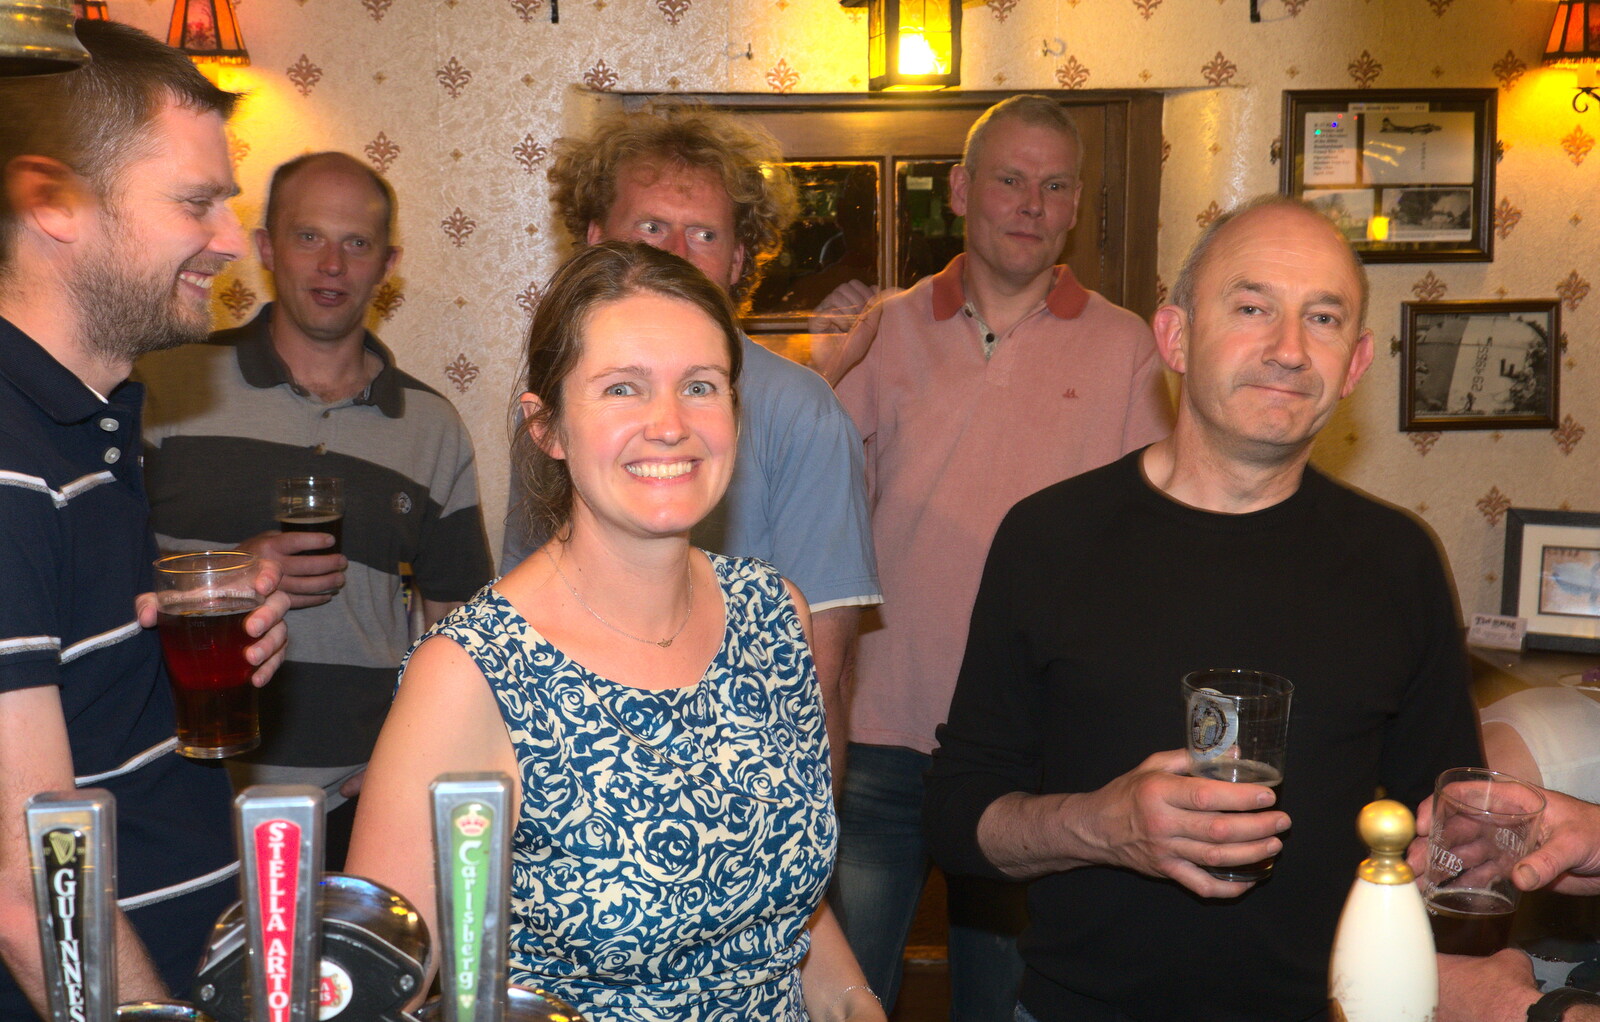 Isobel and DH from A Retirement: The Last Night of The Swan Inn, Brome, Suffolk - 3rd June 2017